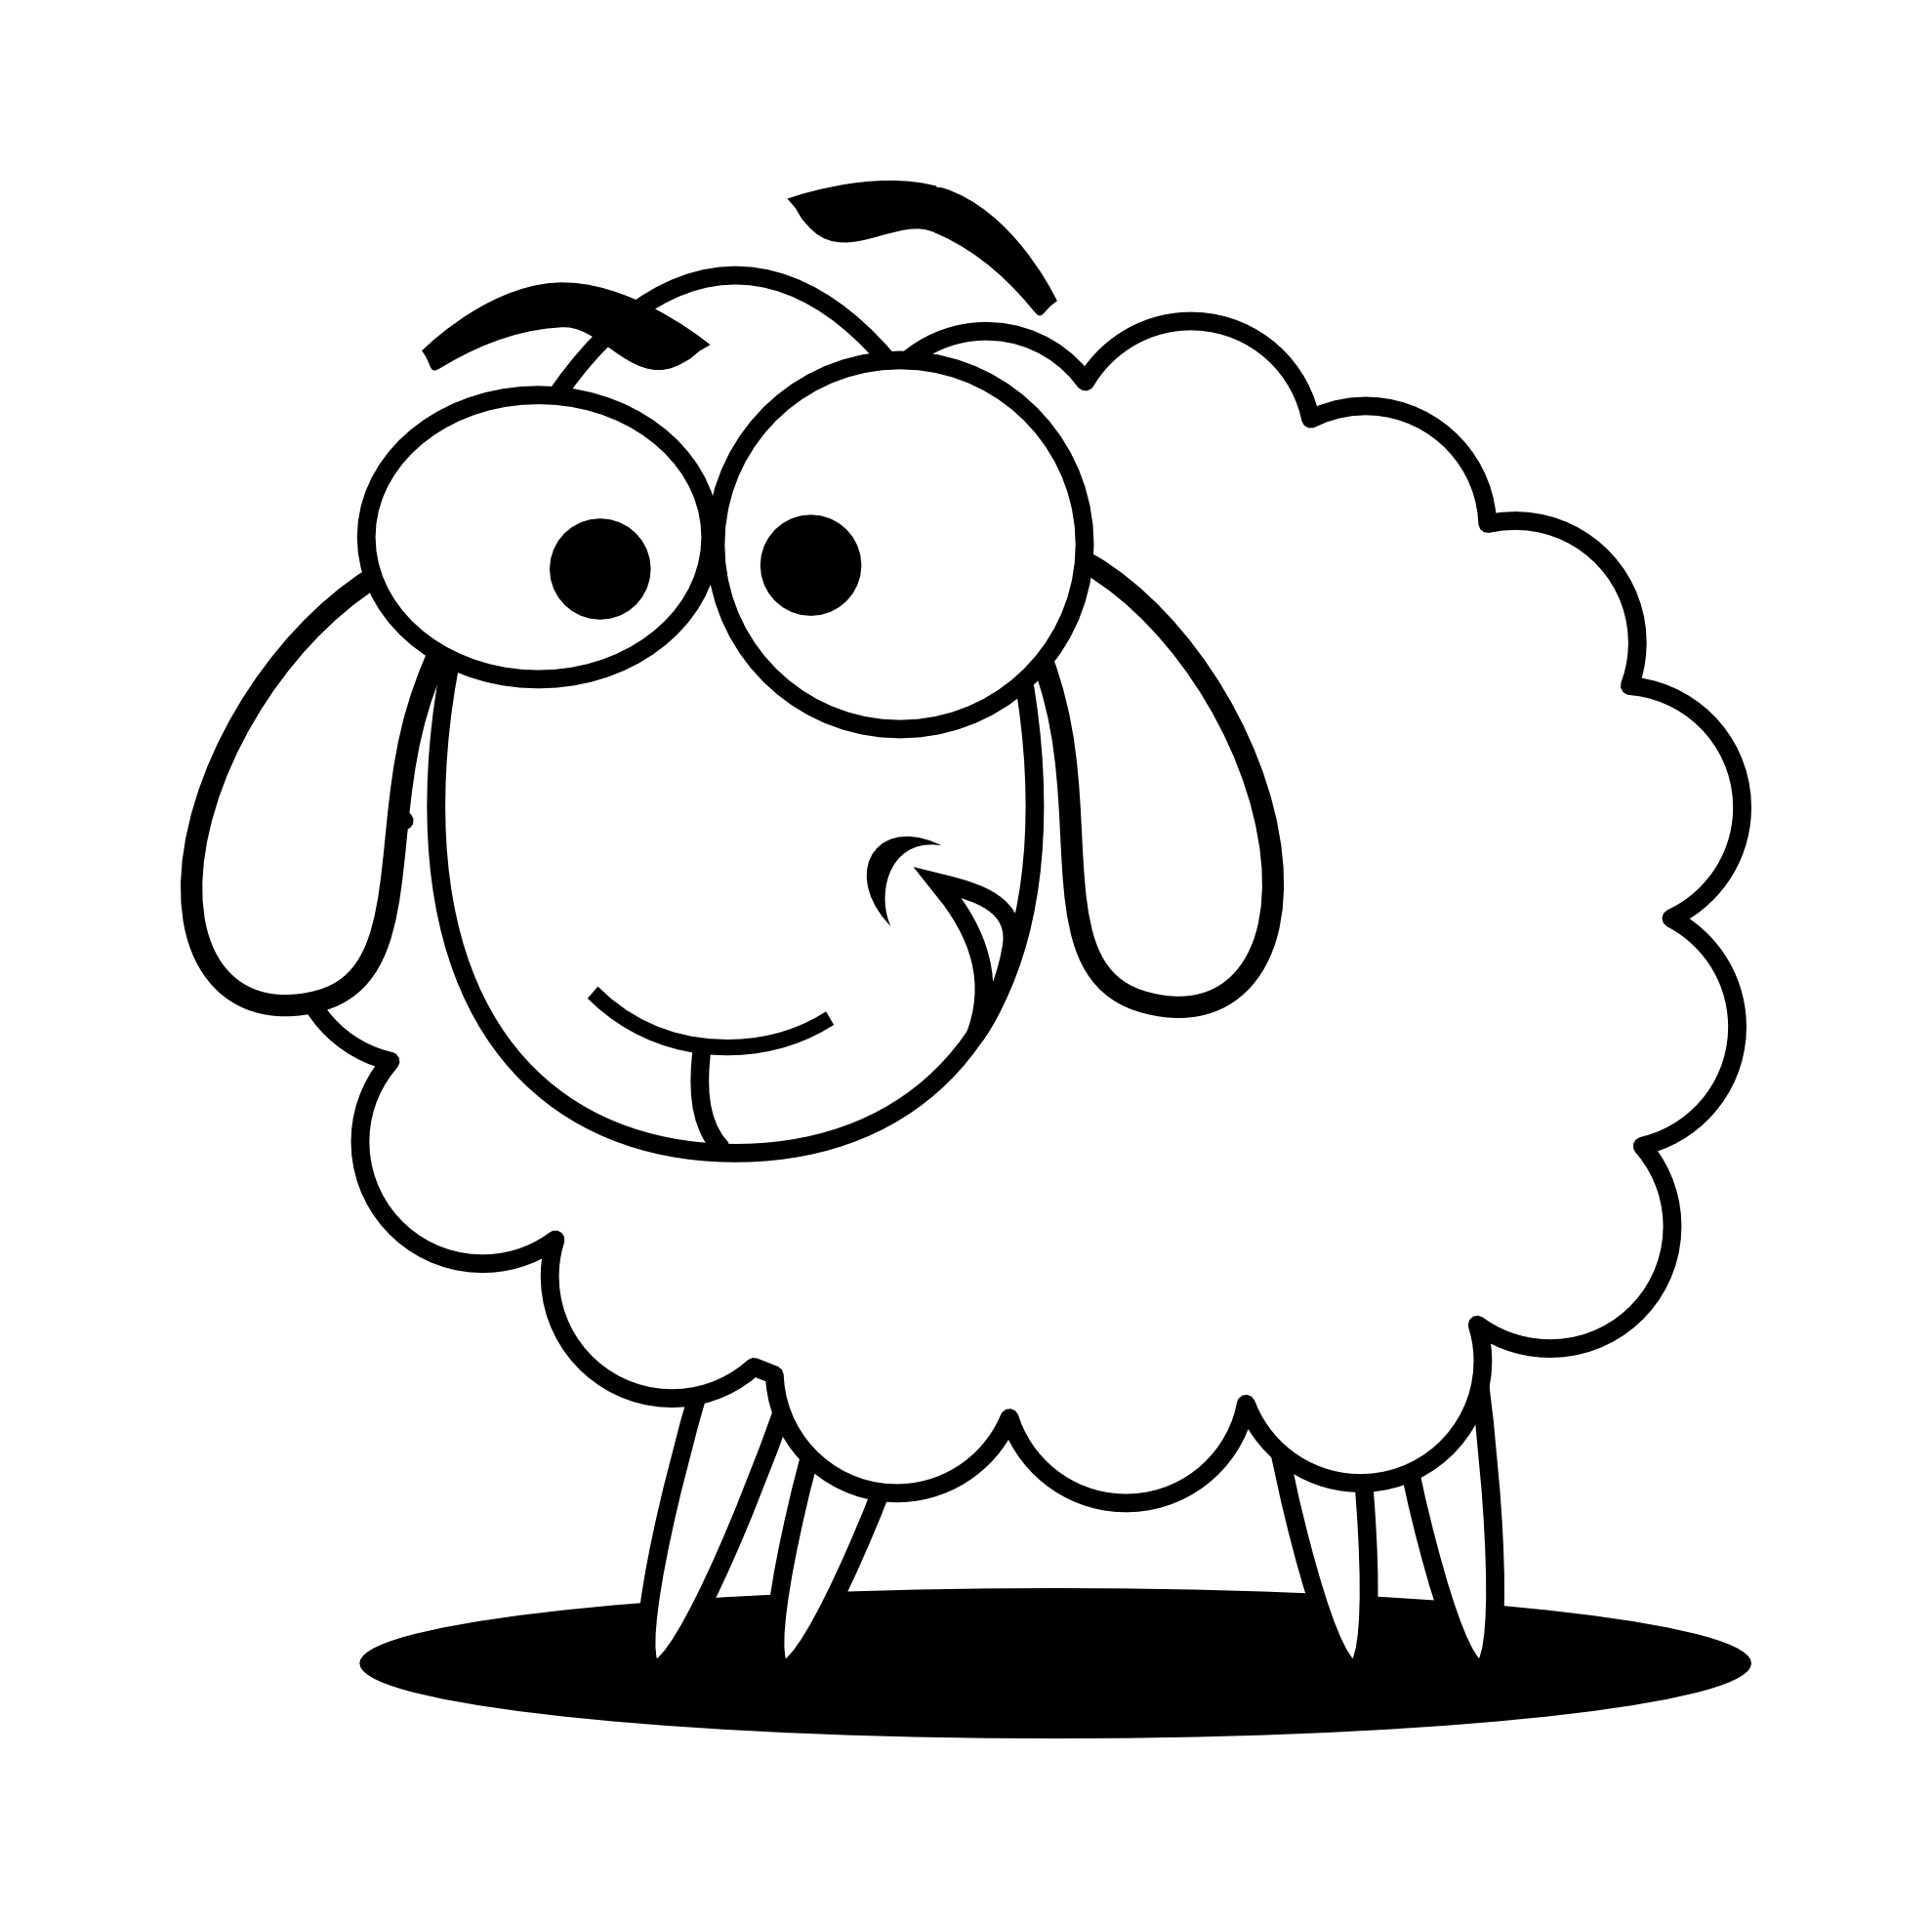 Sheep lamb clipart black and white free images 2